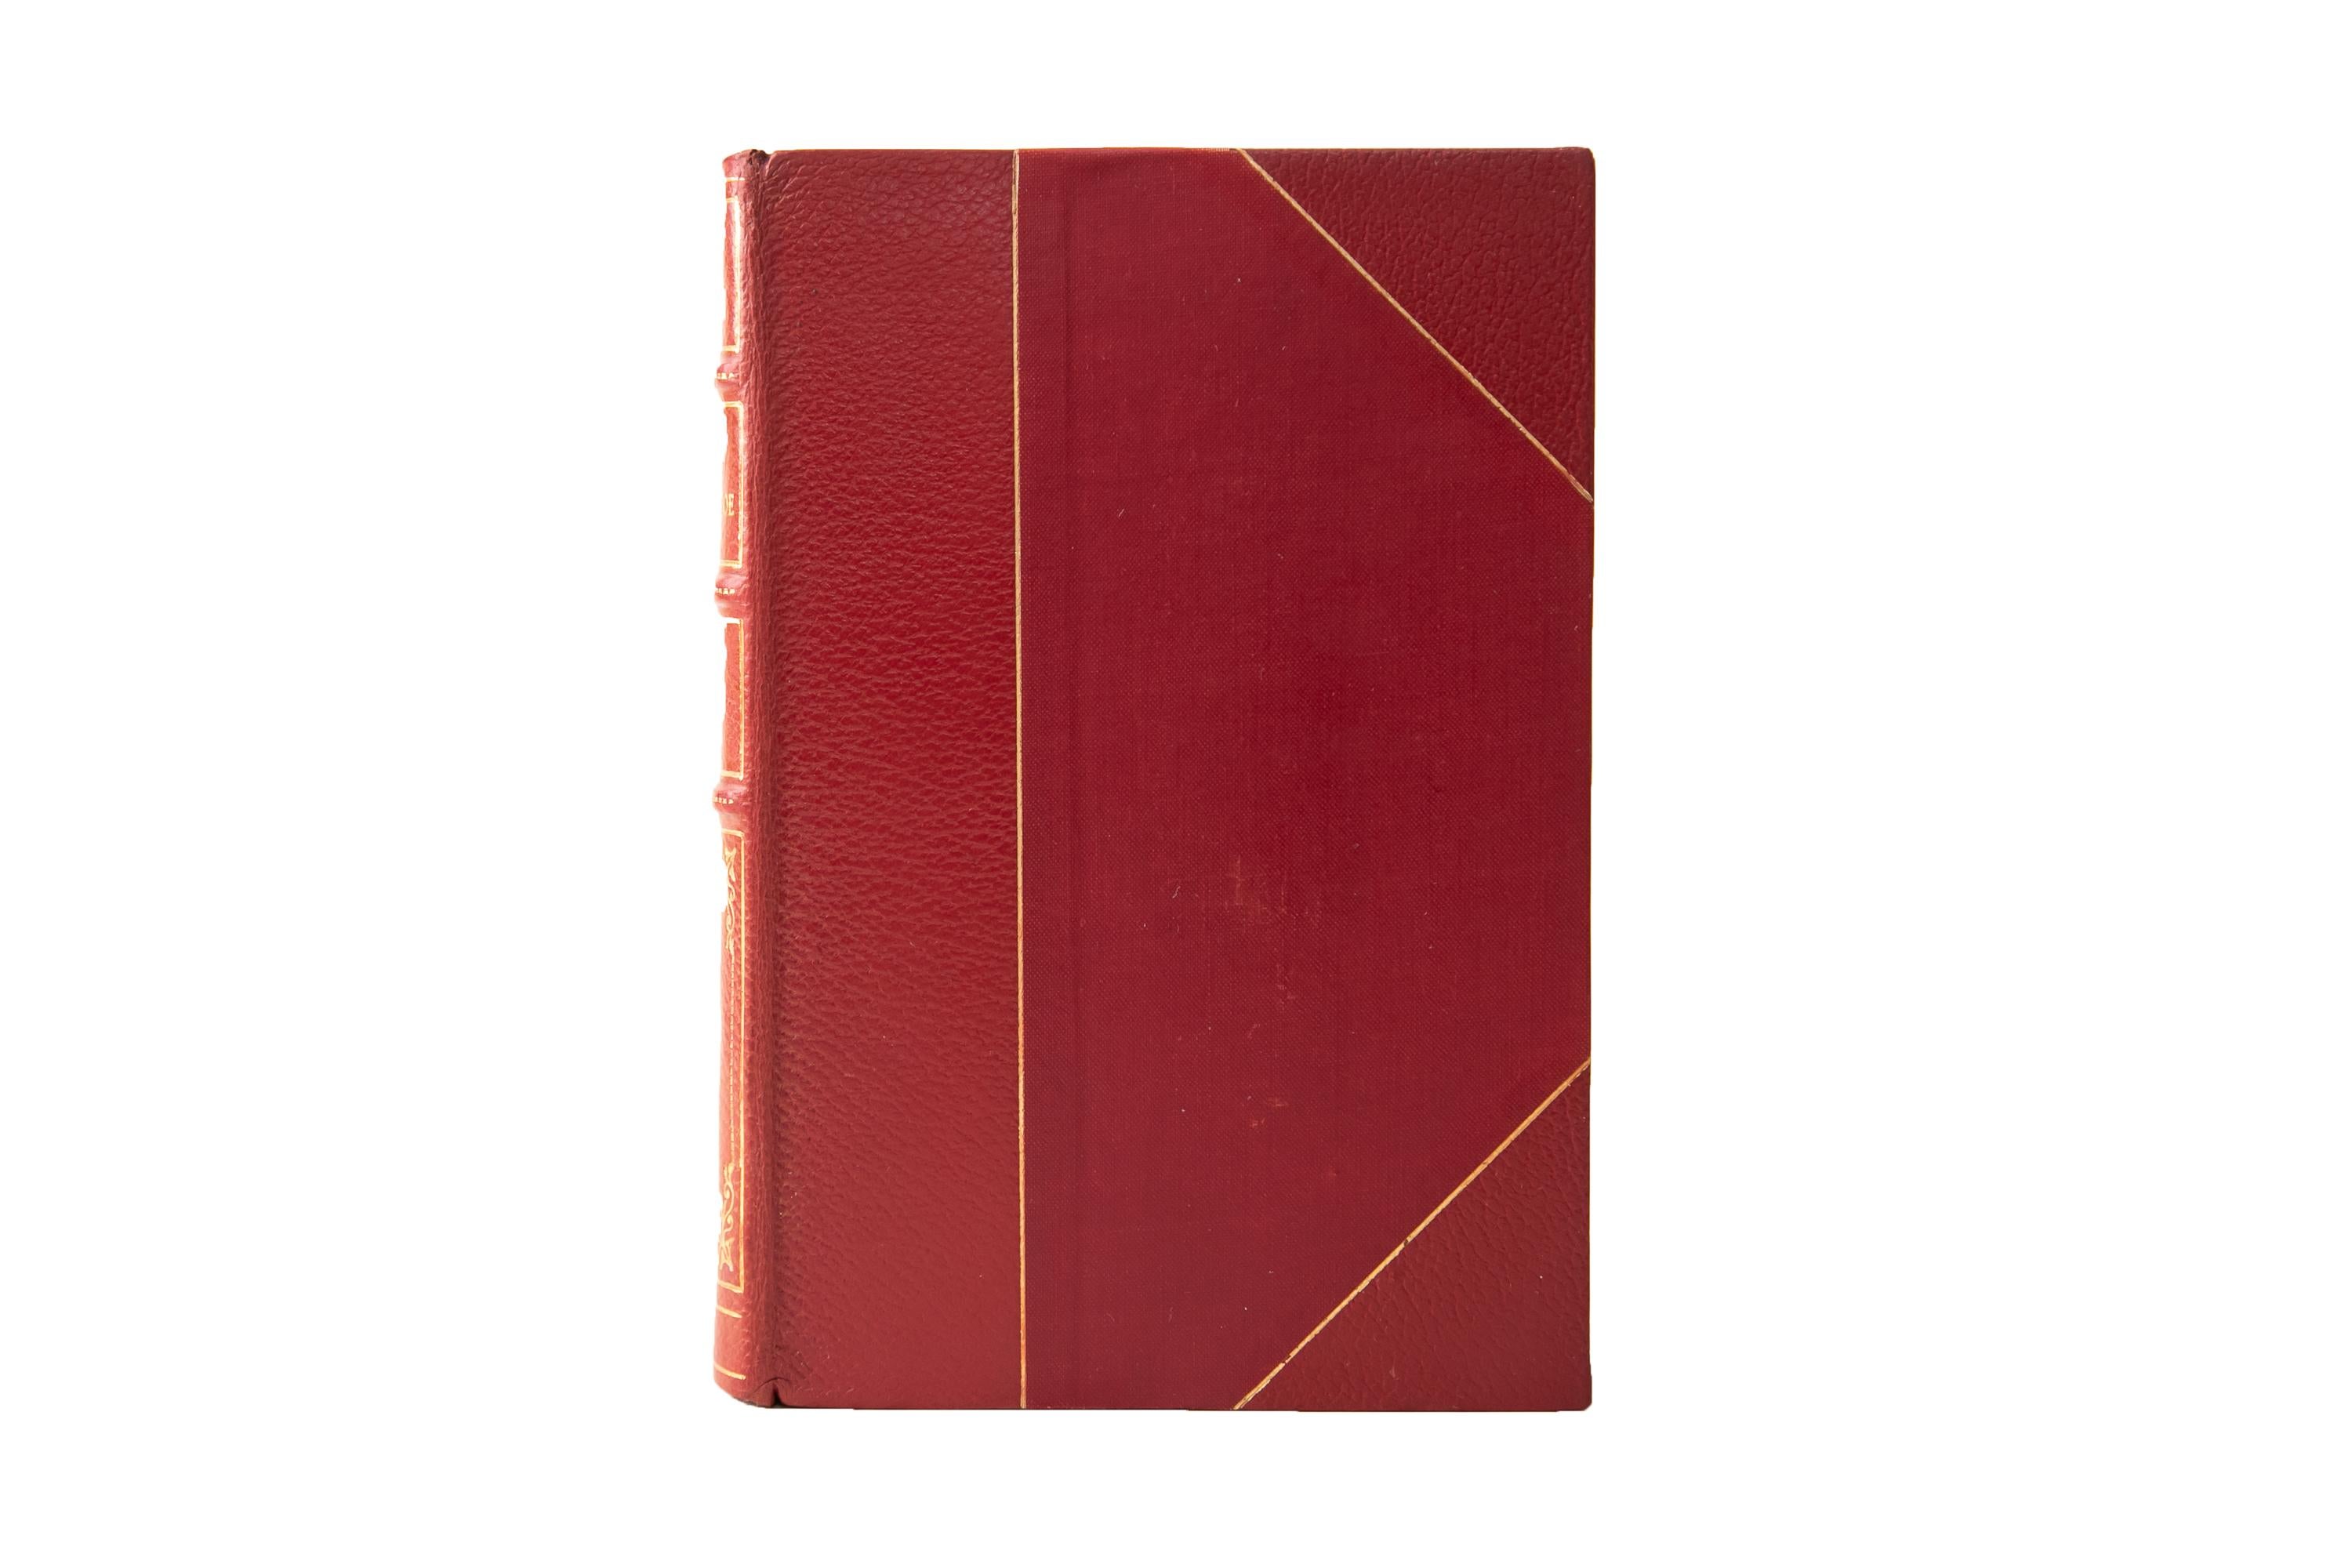 6 Volumes. Edgar Allan Poe, The Complete Works. Bound in 3/4 red morocco and linen boards, bordered in gilt-tooling. The spines display raised bands, bordering, floral panel detailing, and label lettering, all gilt-tooled. The top edges are gilded